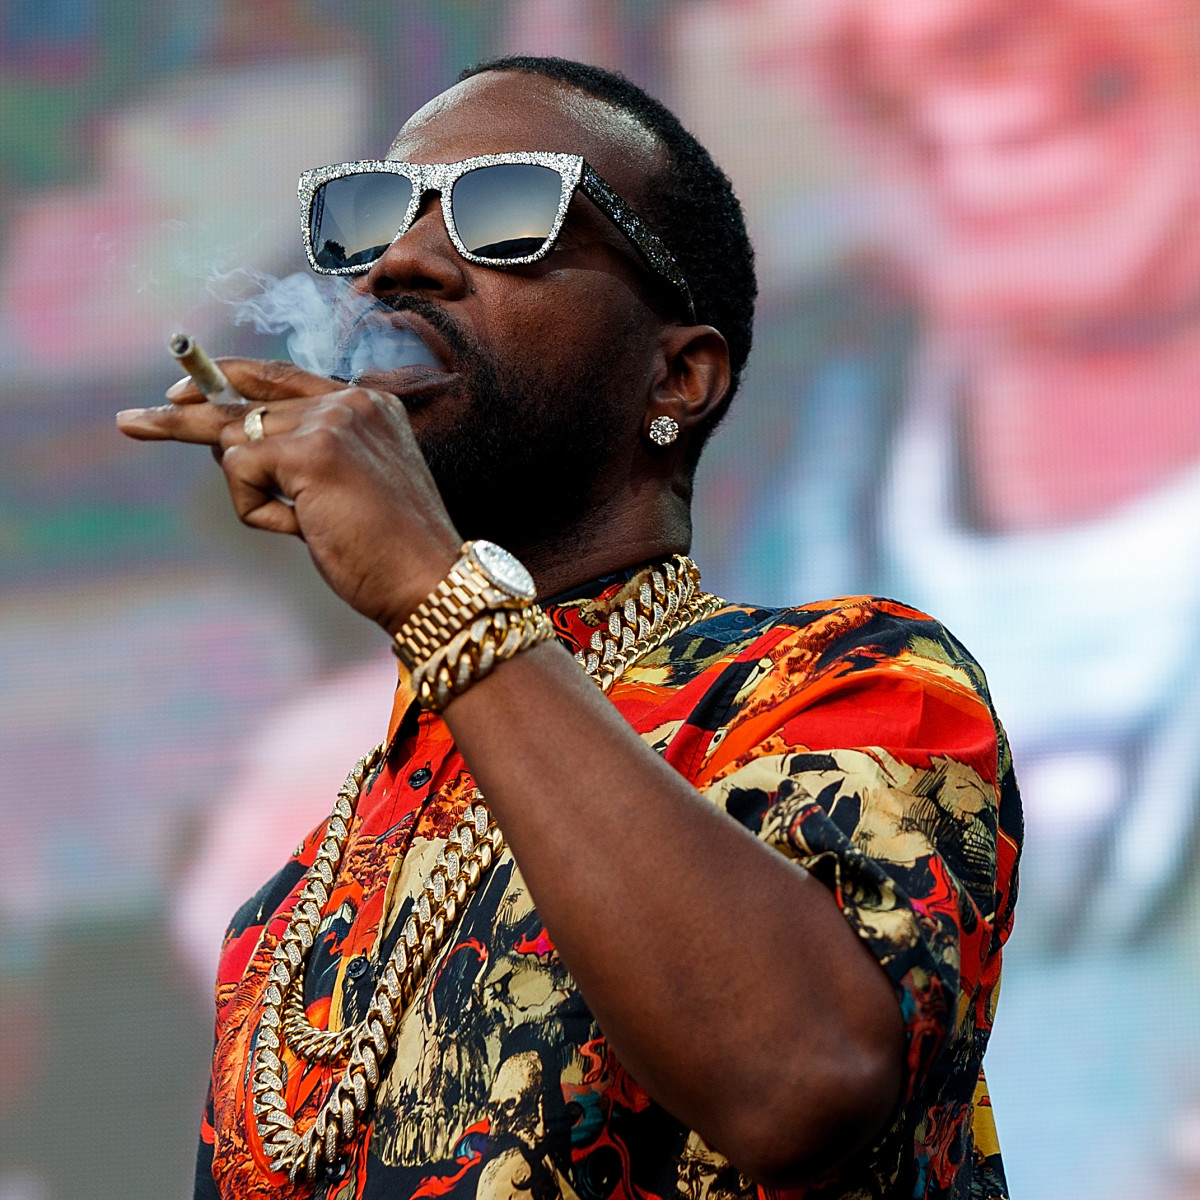 Rapper Juicy J performs on stage during day 2 of Center Of Gravity 2018 at Kelowna City Park on July 28, 2018 in Kelowna, Canada.